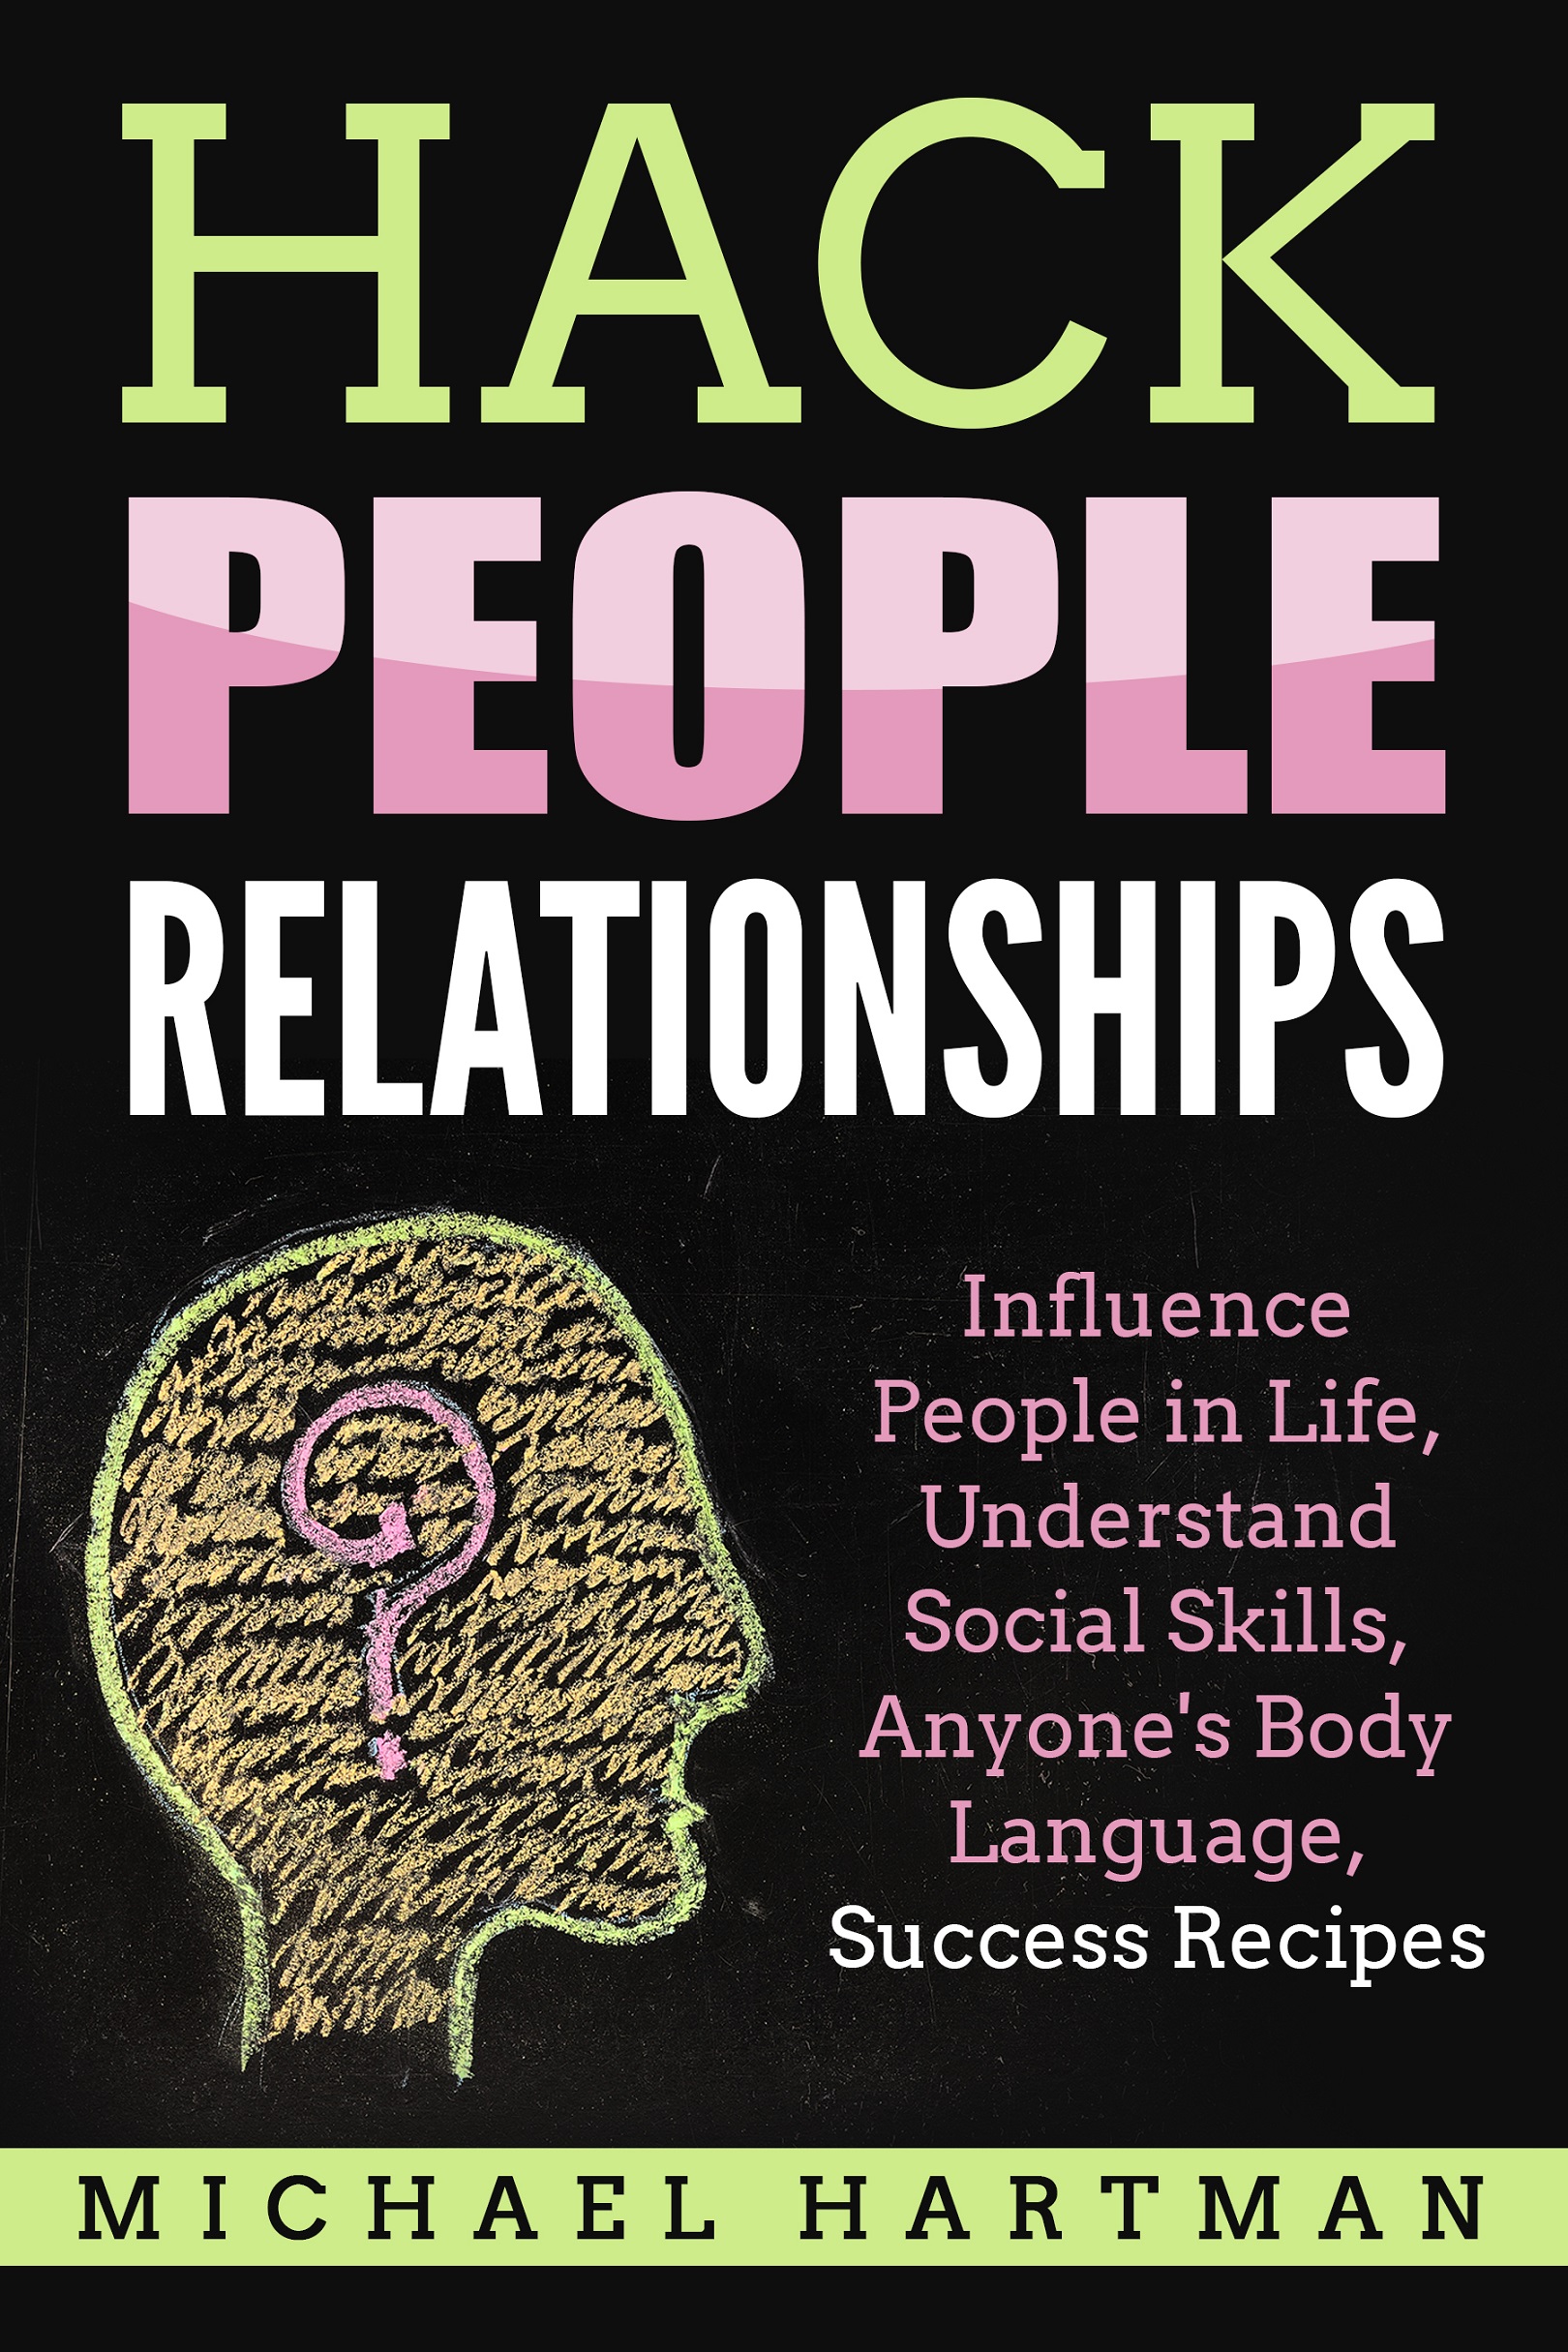 FREE: Hack People Relationships by Michael Hartman